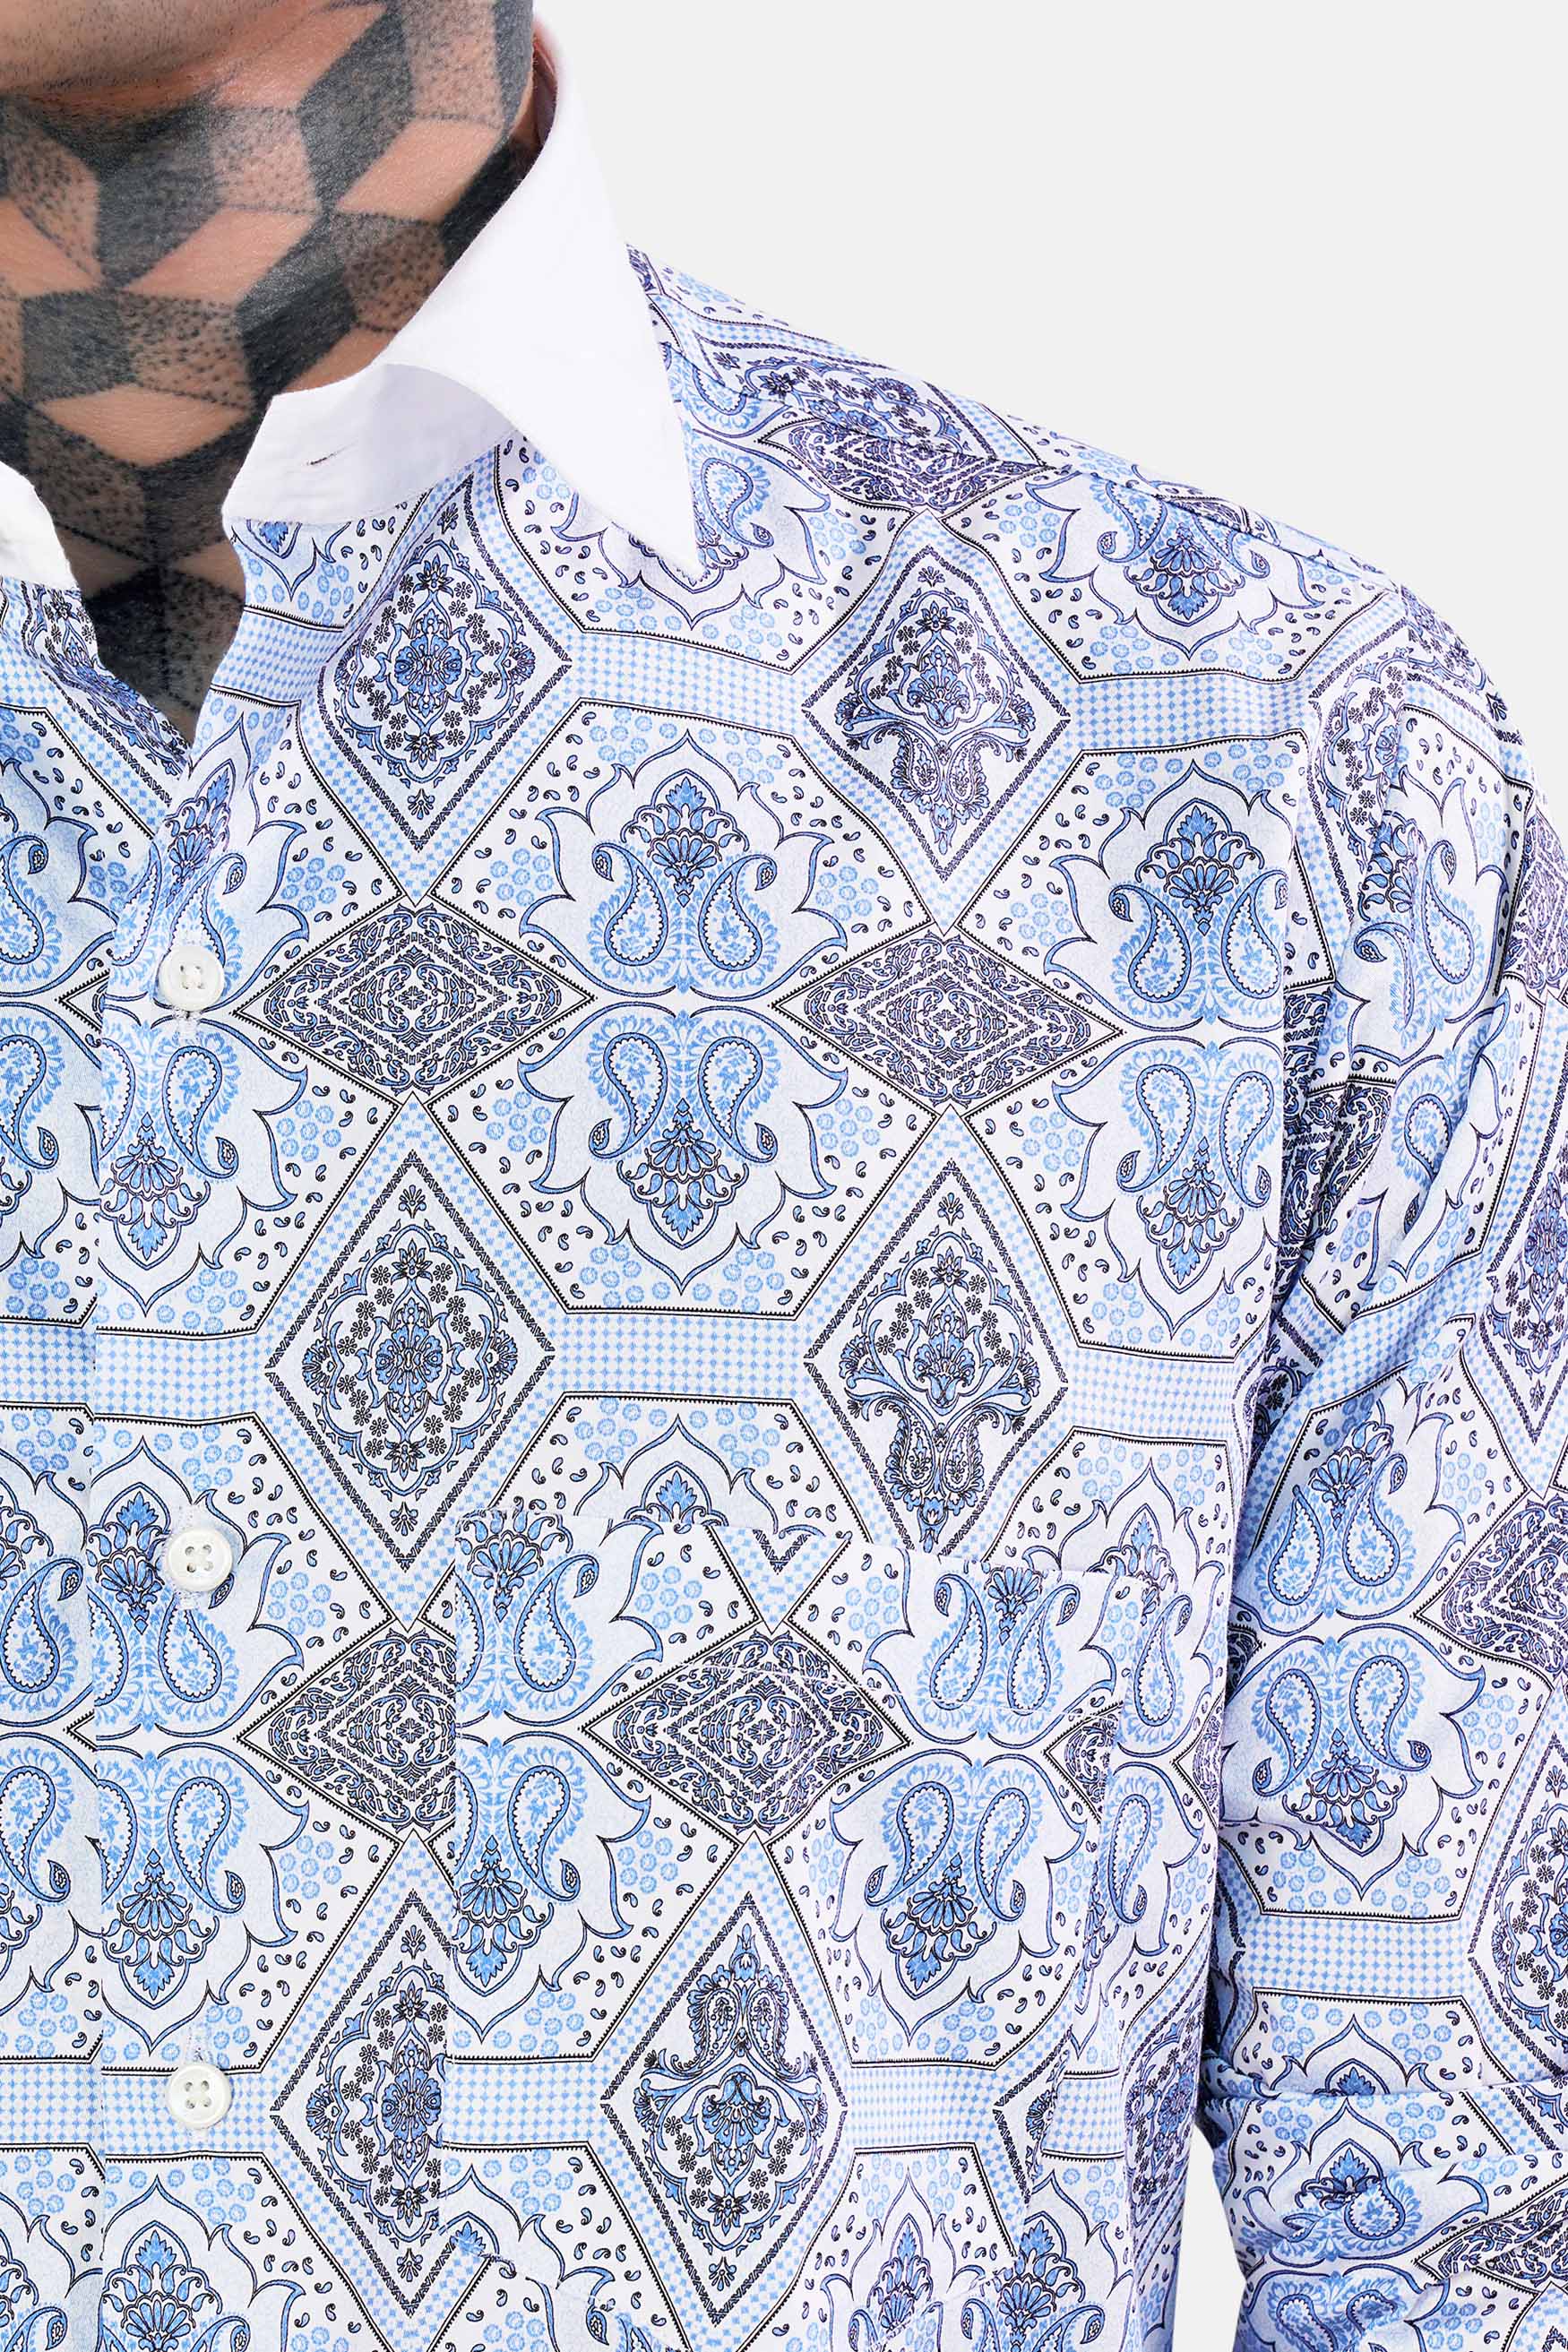 Tufts Blue Ethnic Printed with White Cuffs and Collar Subtle Sheen Super Soft Premium Cotton Shirt